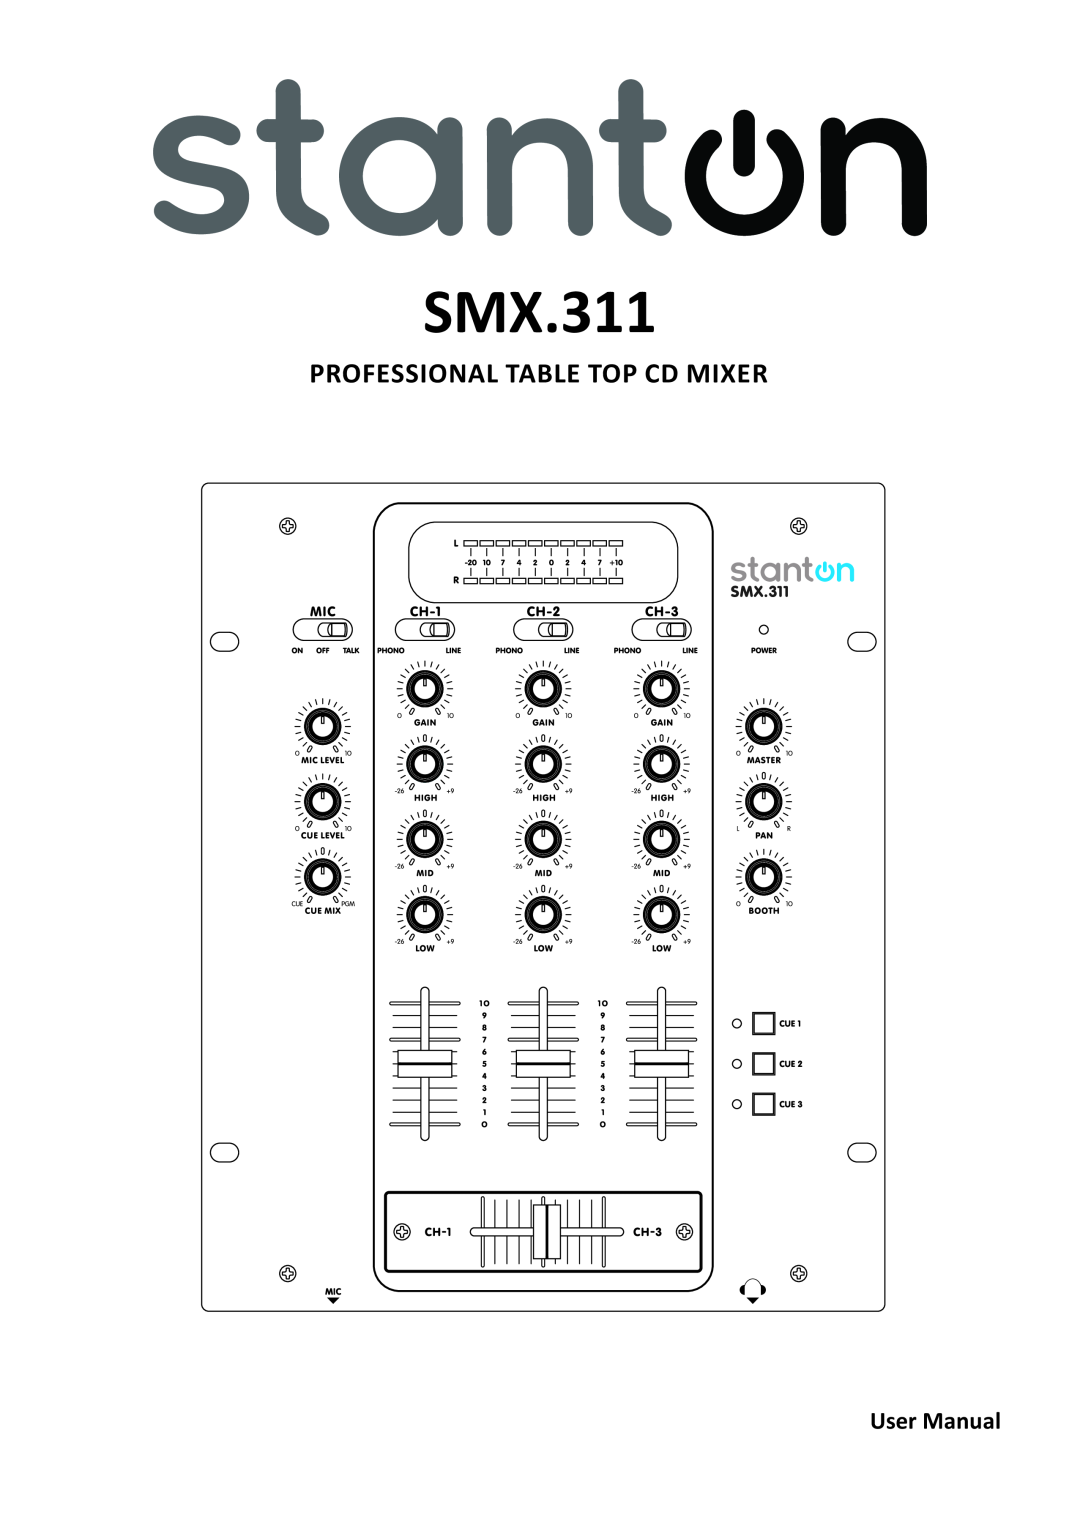 Stanton SMX.311 manual ProfeSSional Table ToP CD MiXer 